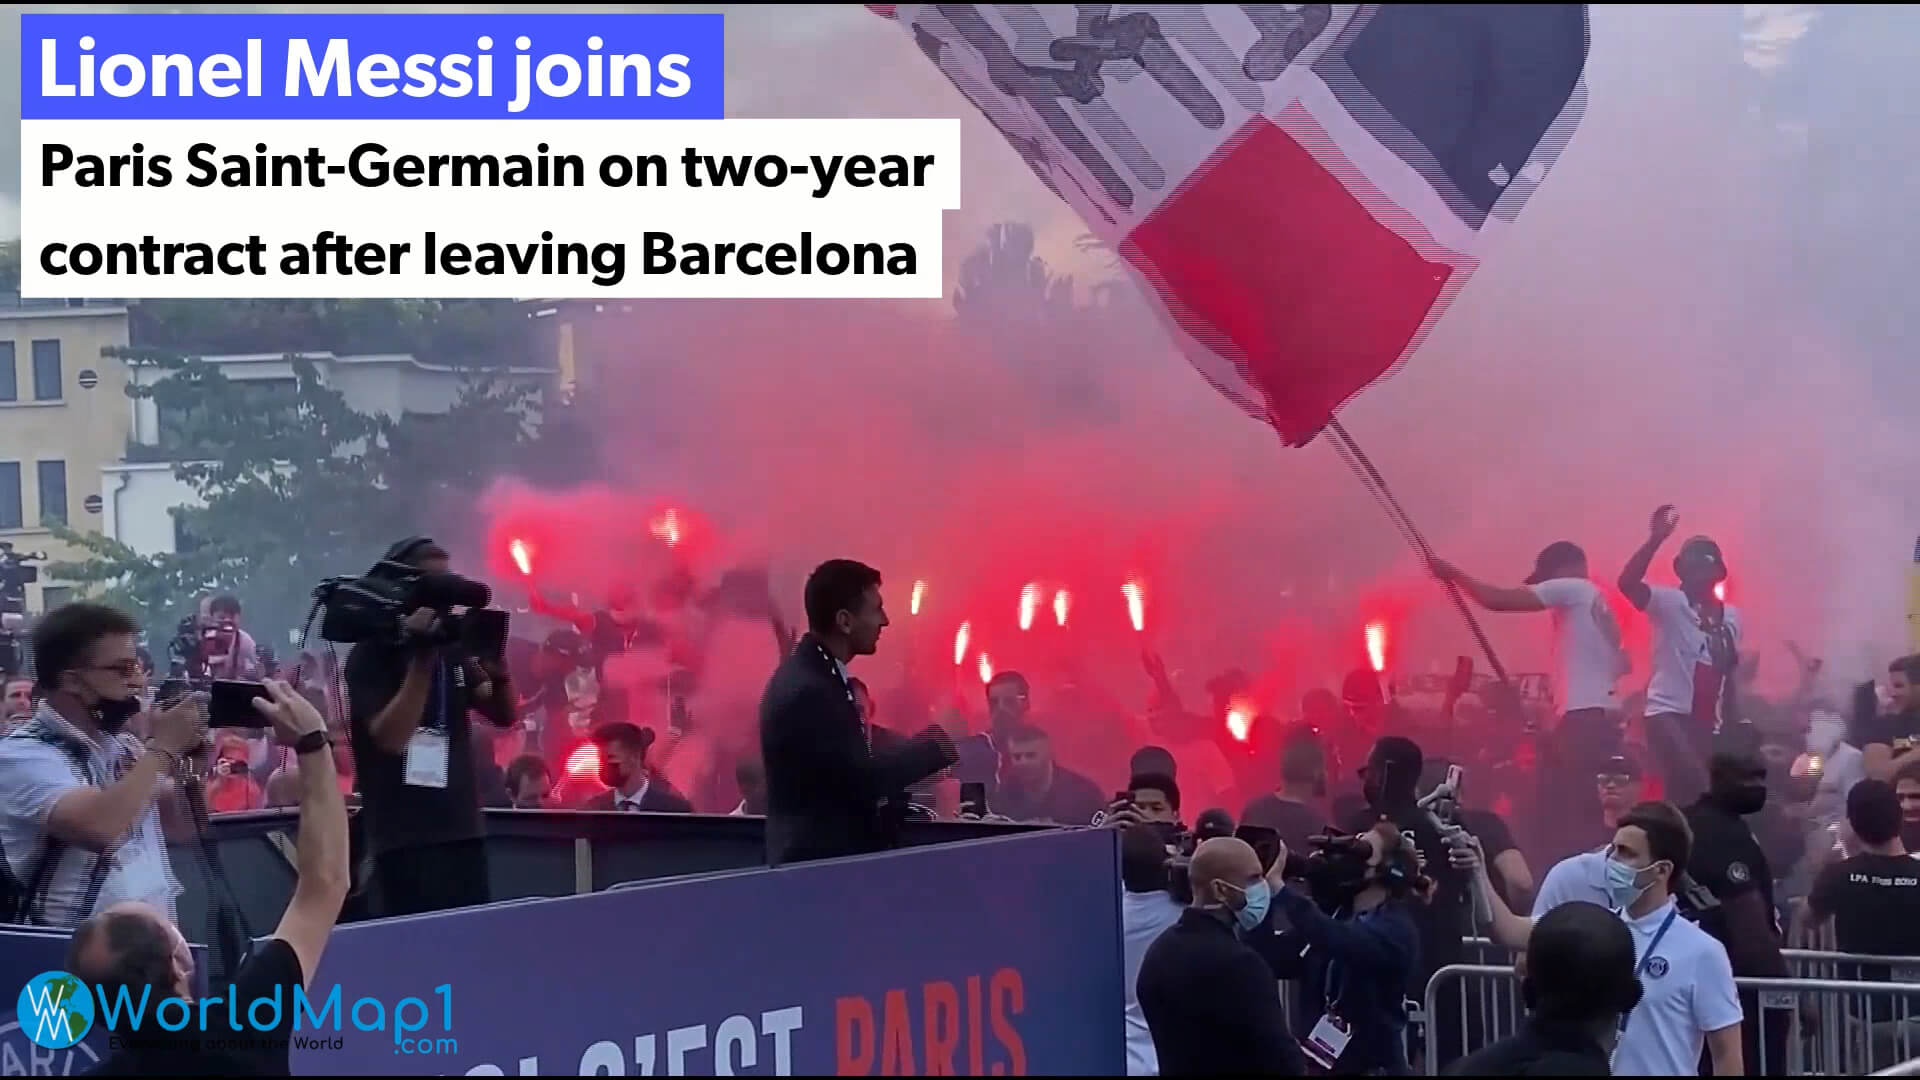 Lionel Messi joins PSG from Barcelona in 2021